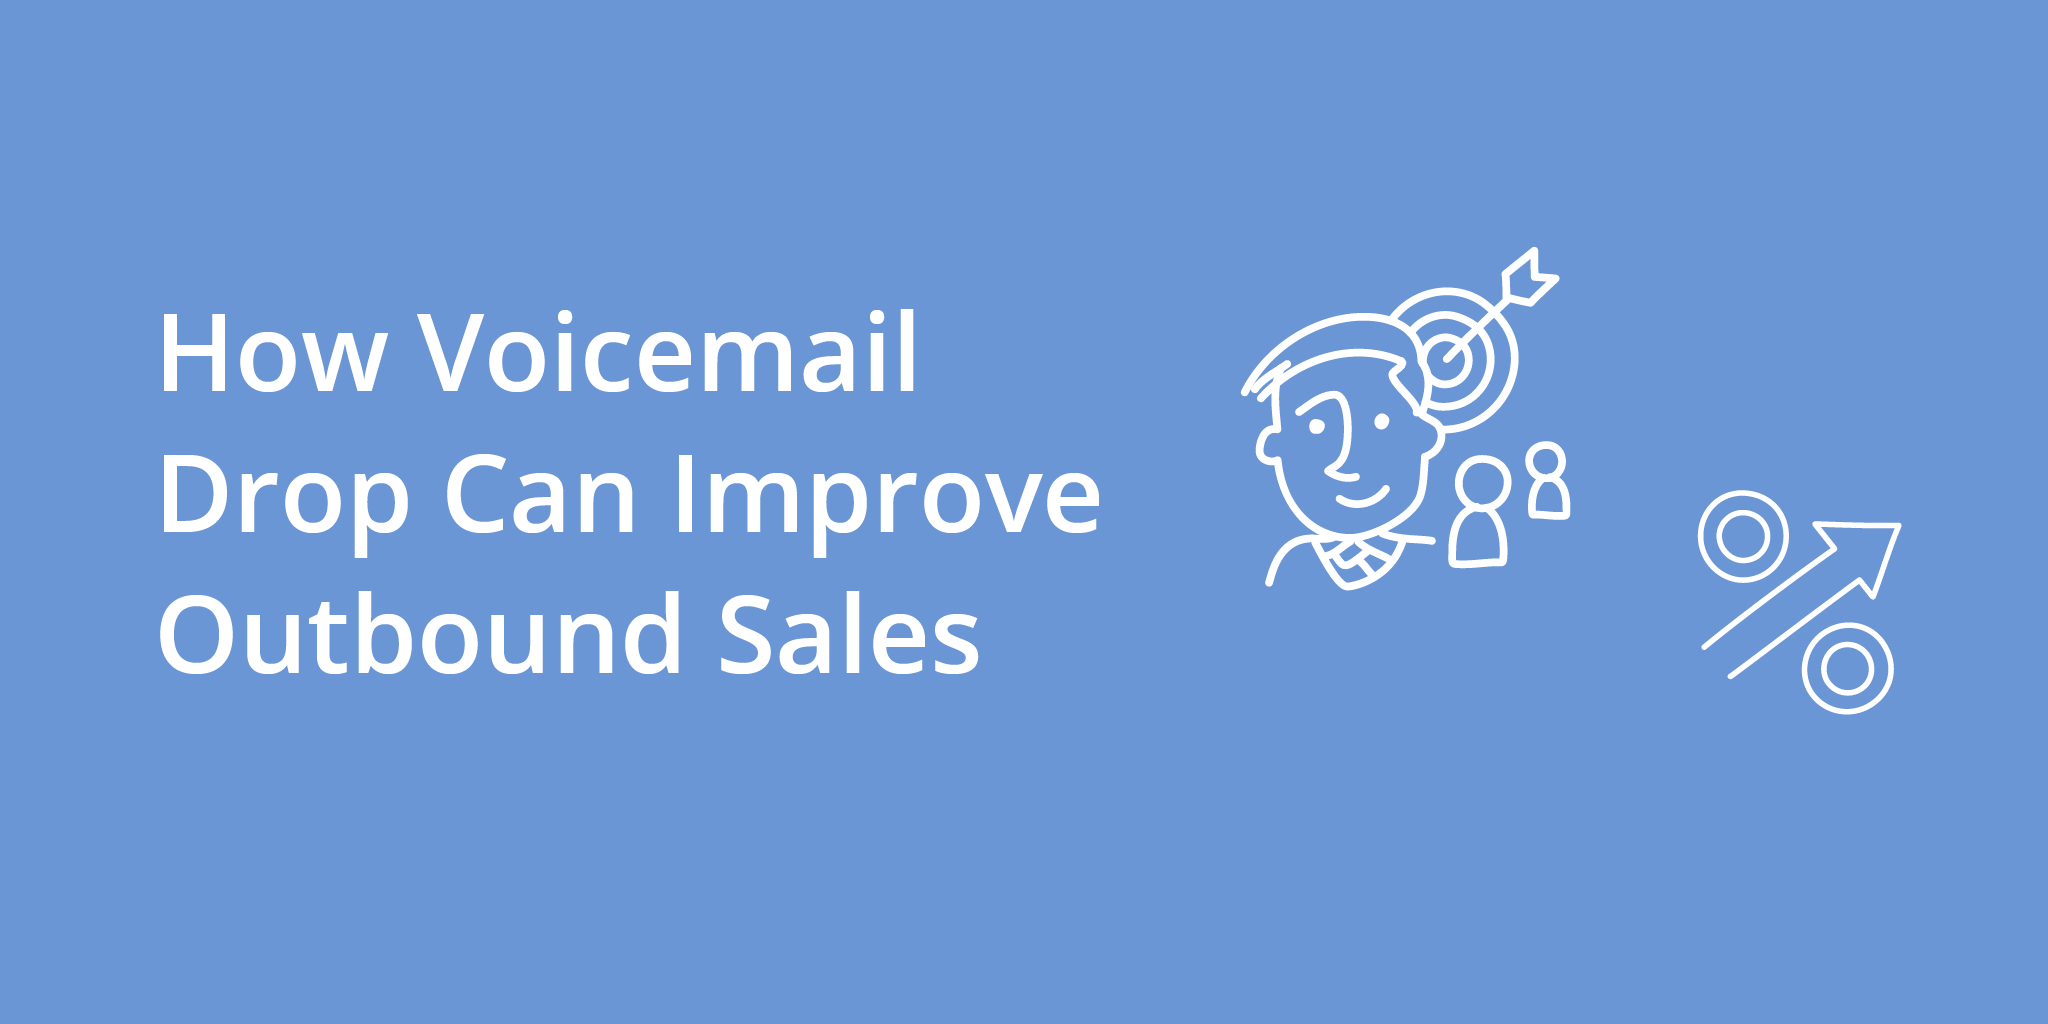 How Voicemail Drop Can Improve Outbound Sales | Telephones for business